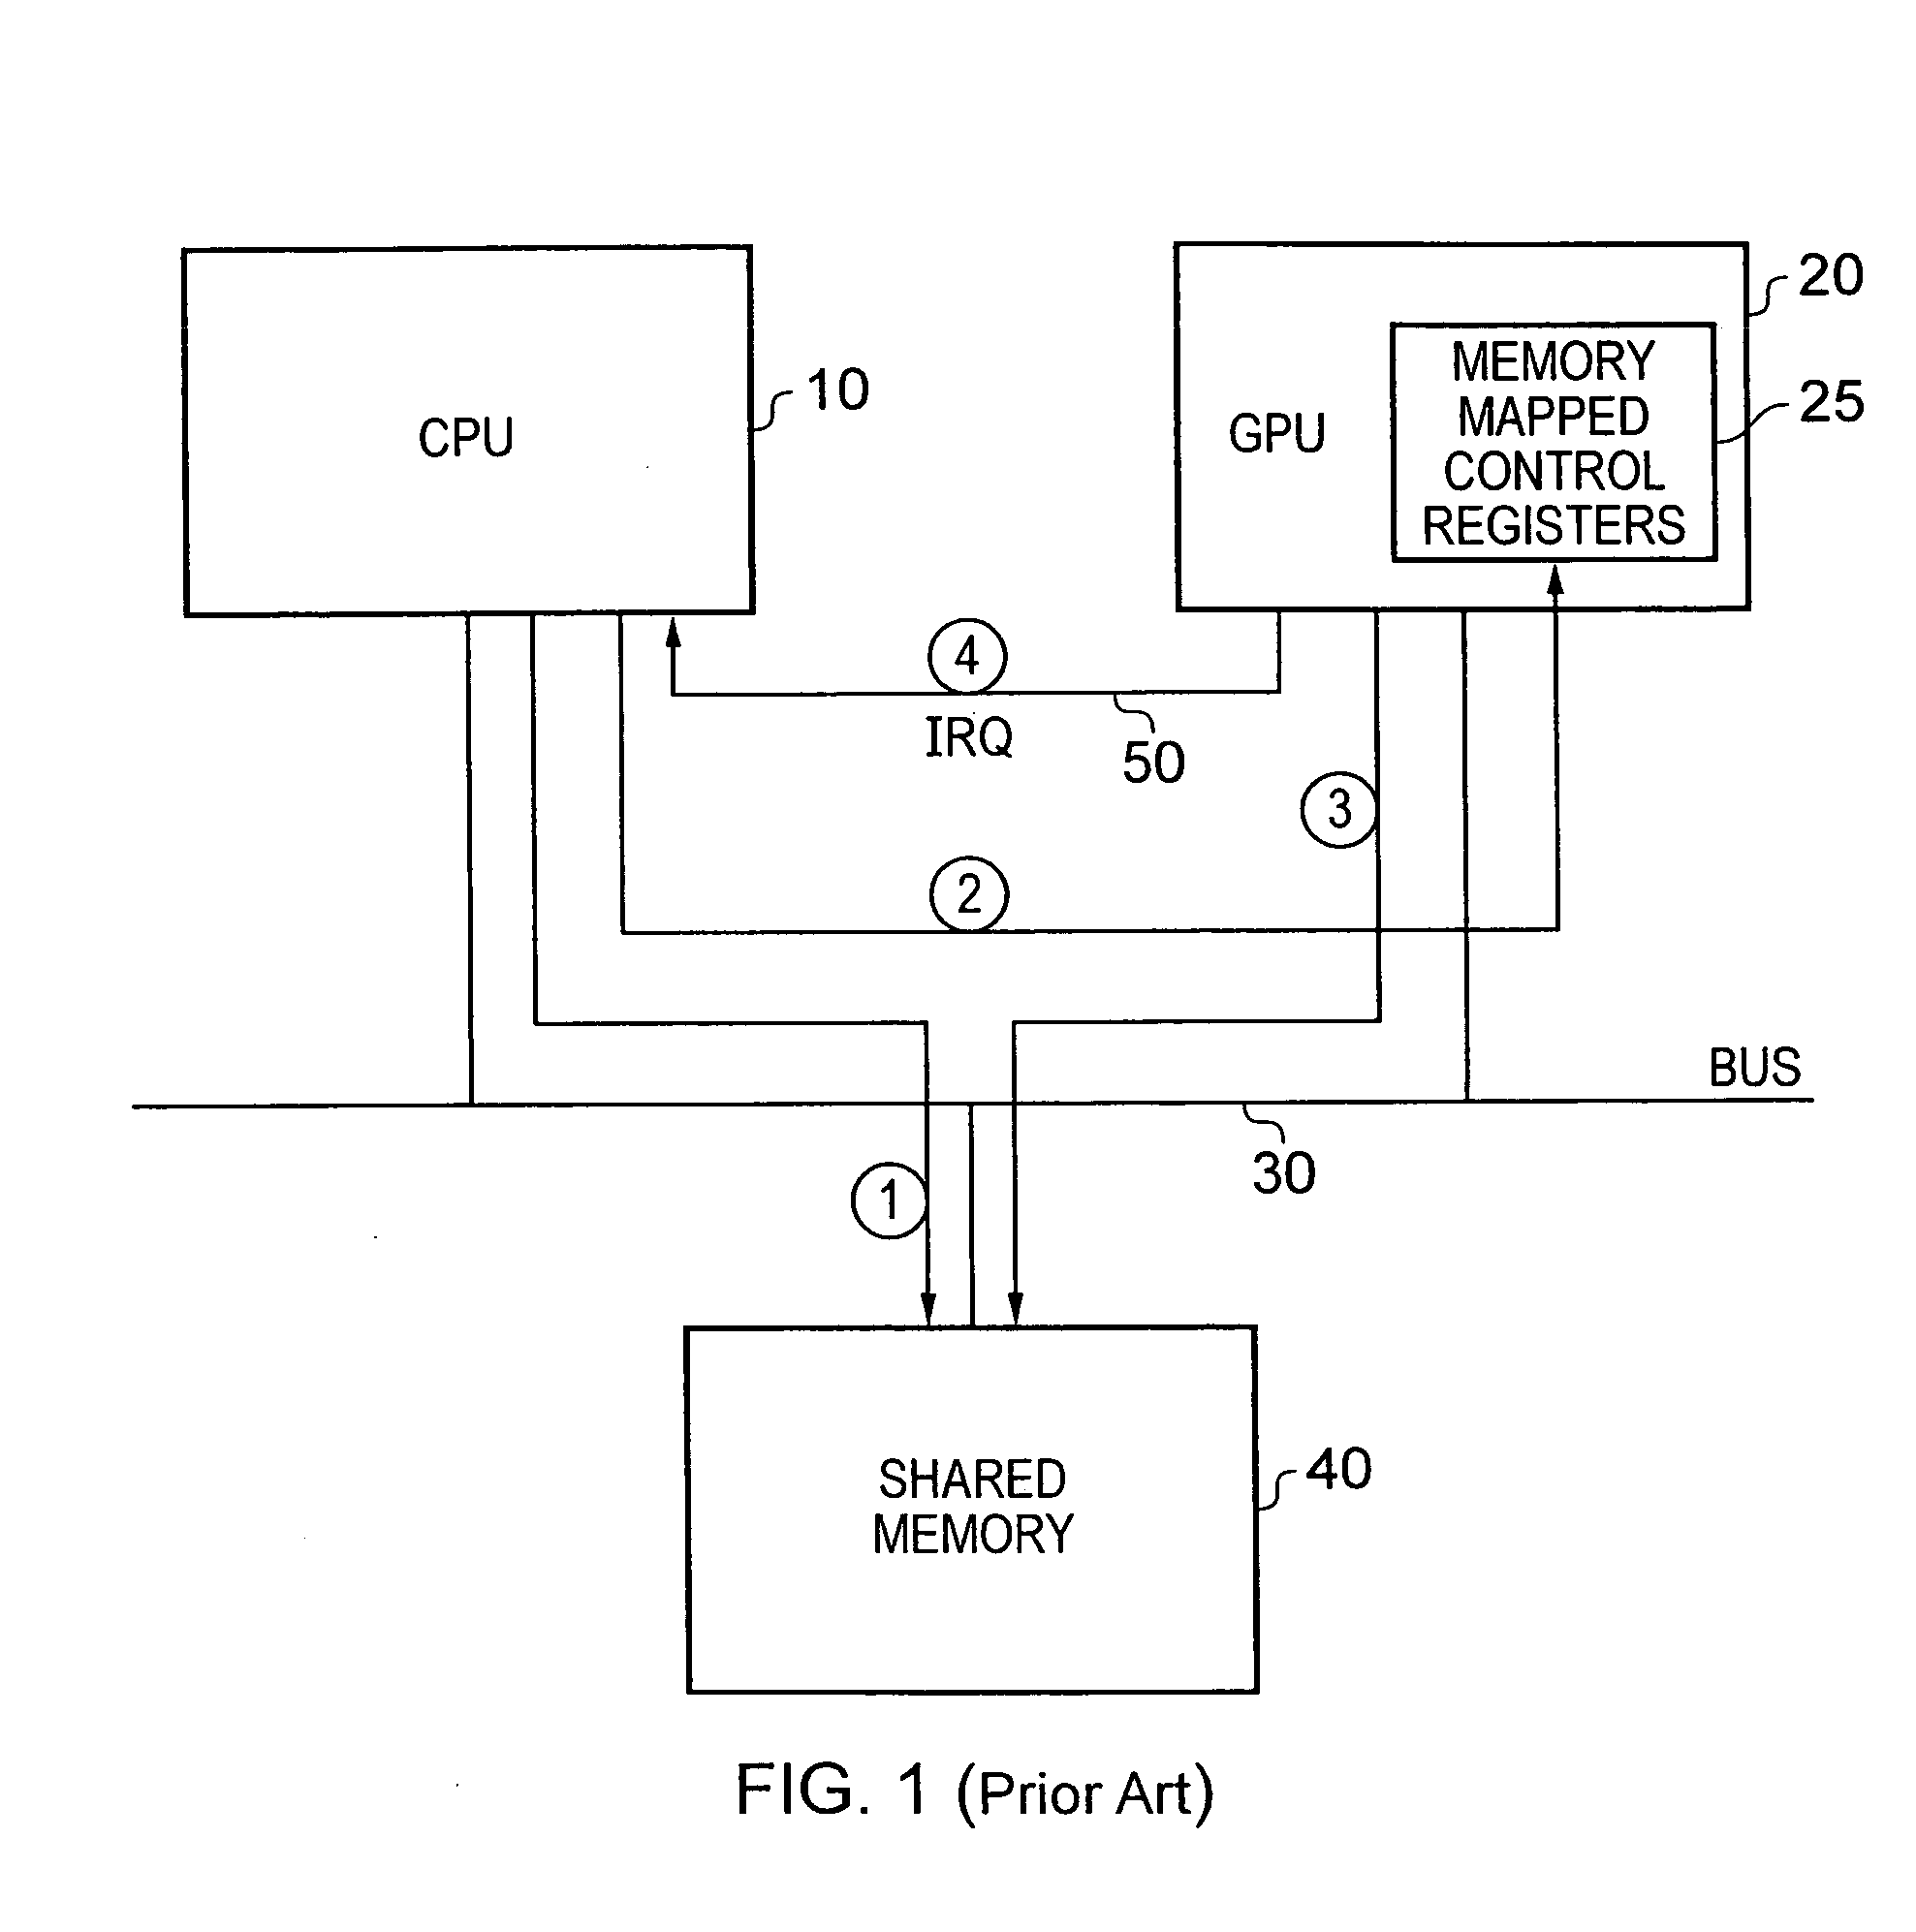 Apparatus and method for communicating between a central processing unit and a graphics processing unit